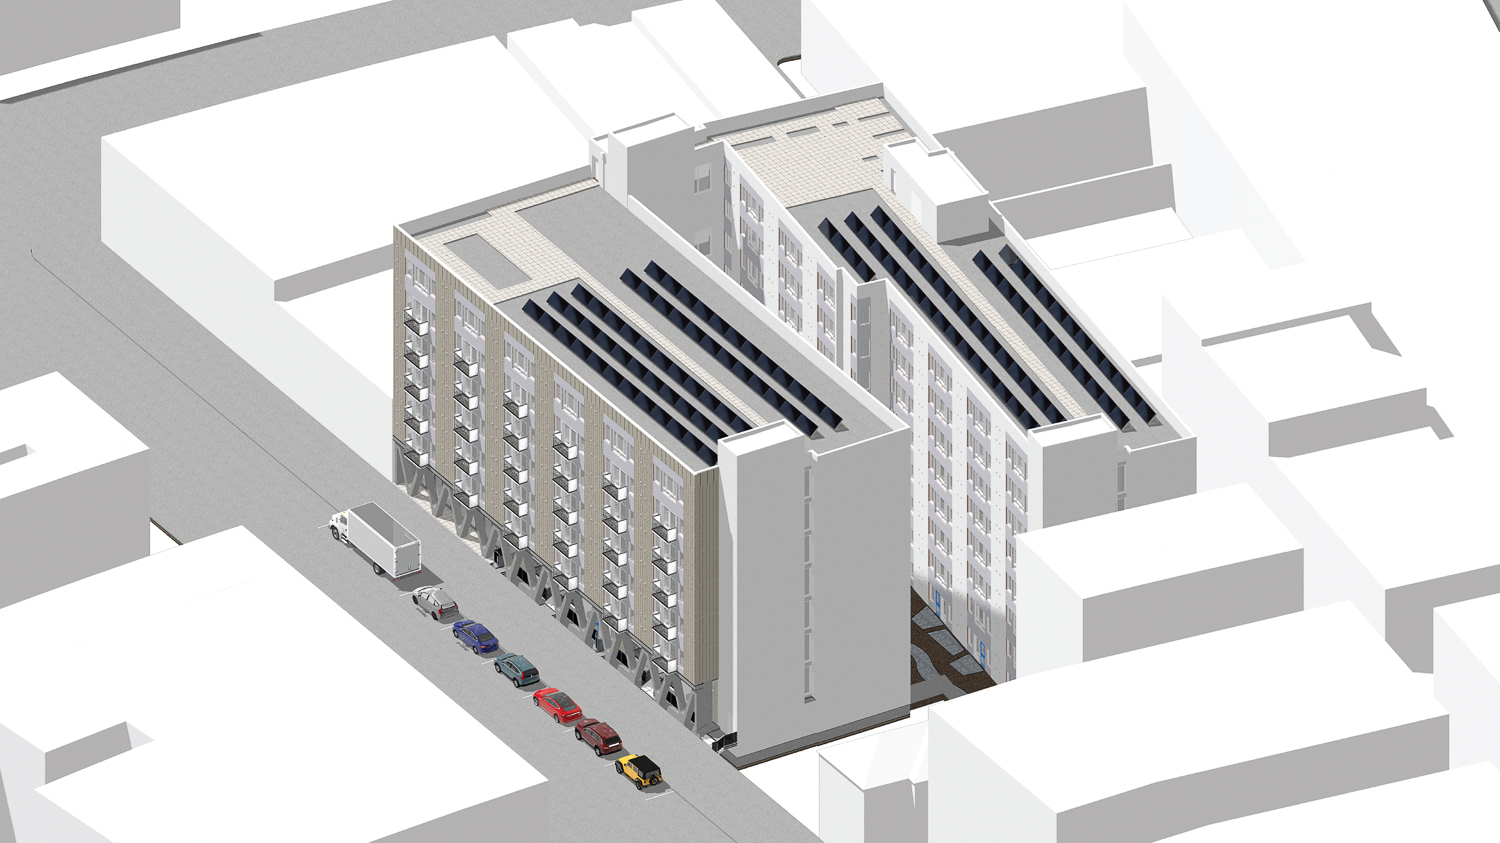 333 12th Street, aerial axonometric view by BDE Architecture